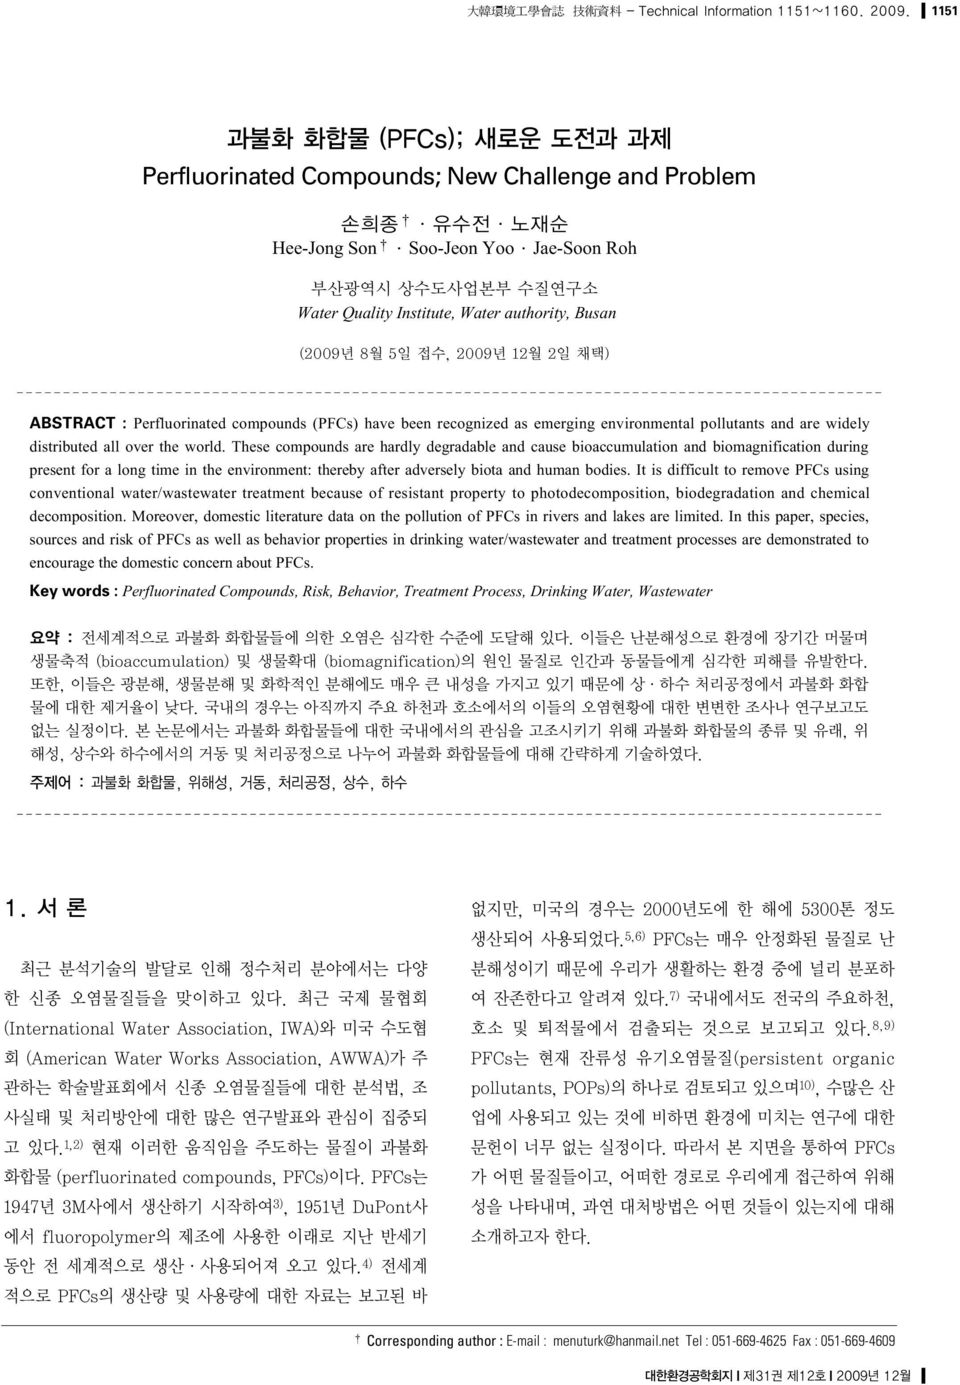 Busan (2009년 8월 5일 접수, 2009년 12월 2일 채택) ABSTRACT : Perfluorinated compounds (PFCs) have been recognized as emerging environmental pollutants and are widely distributed all over the world.